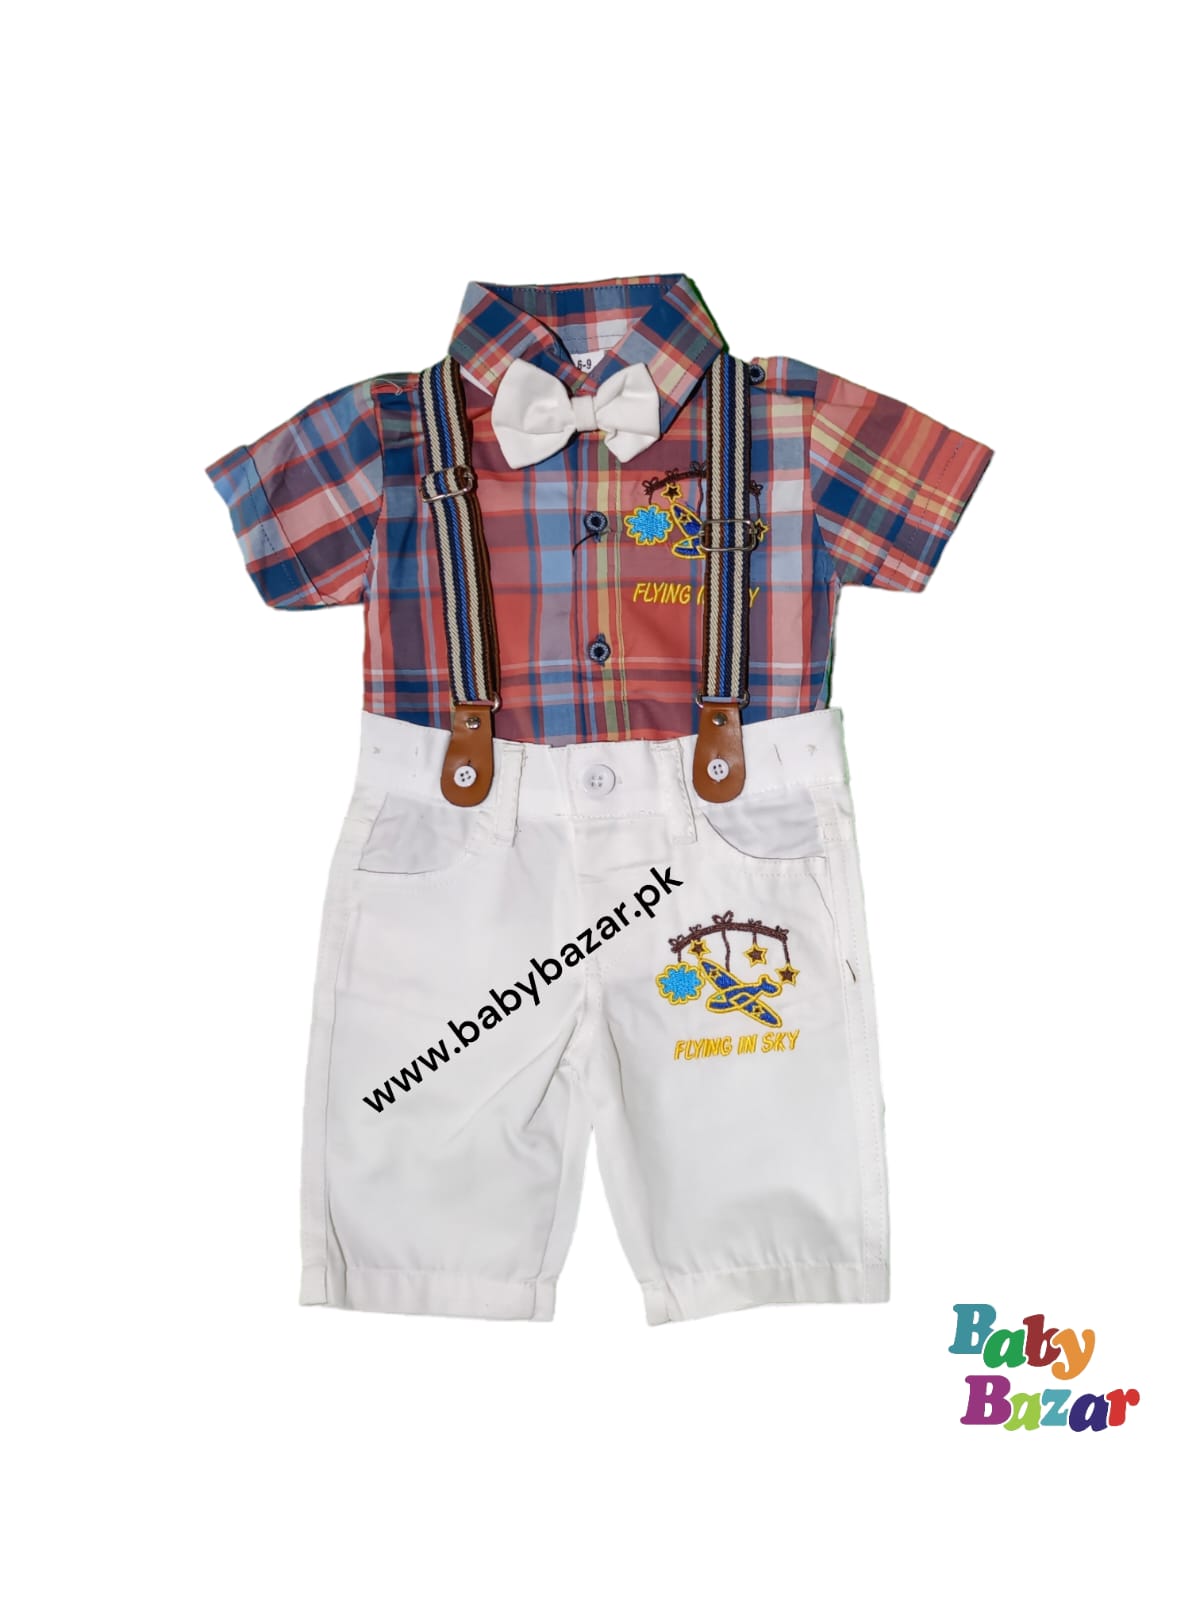 Baby Boys Lattice Outfits Children Plaid Shirt Top+Strap+Shorts  For Summer